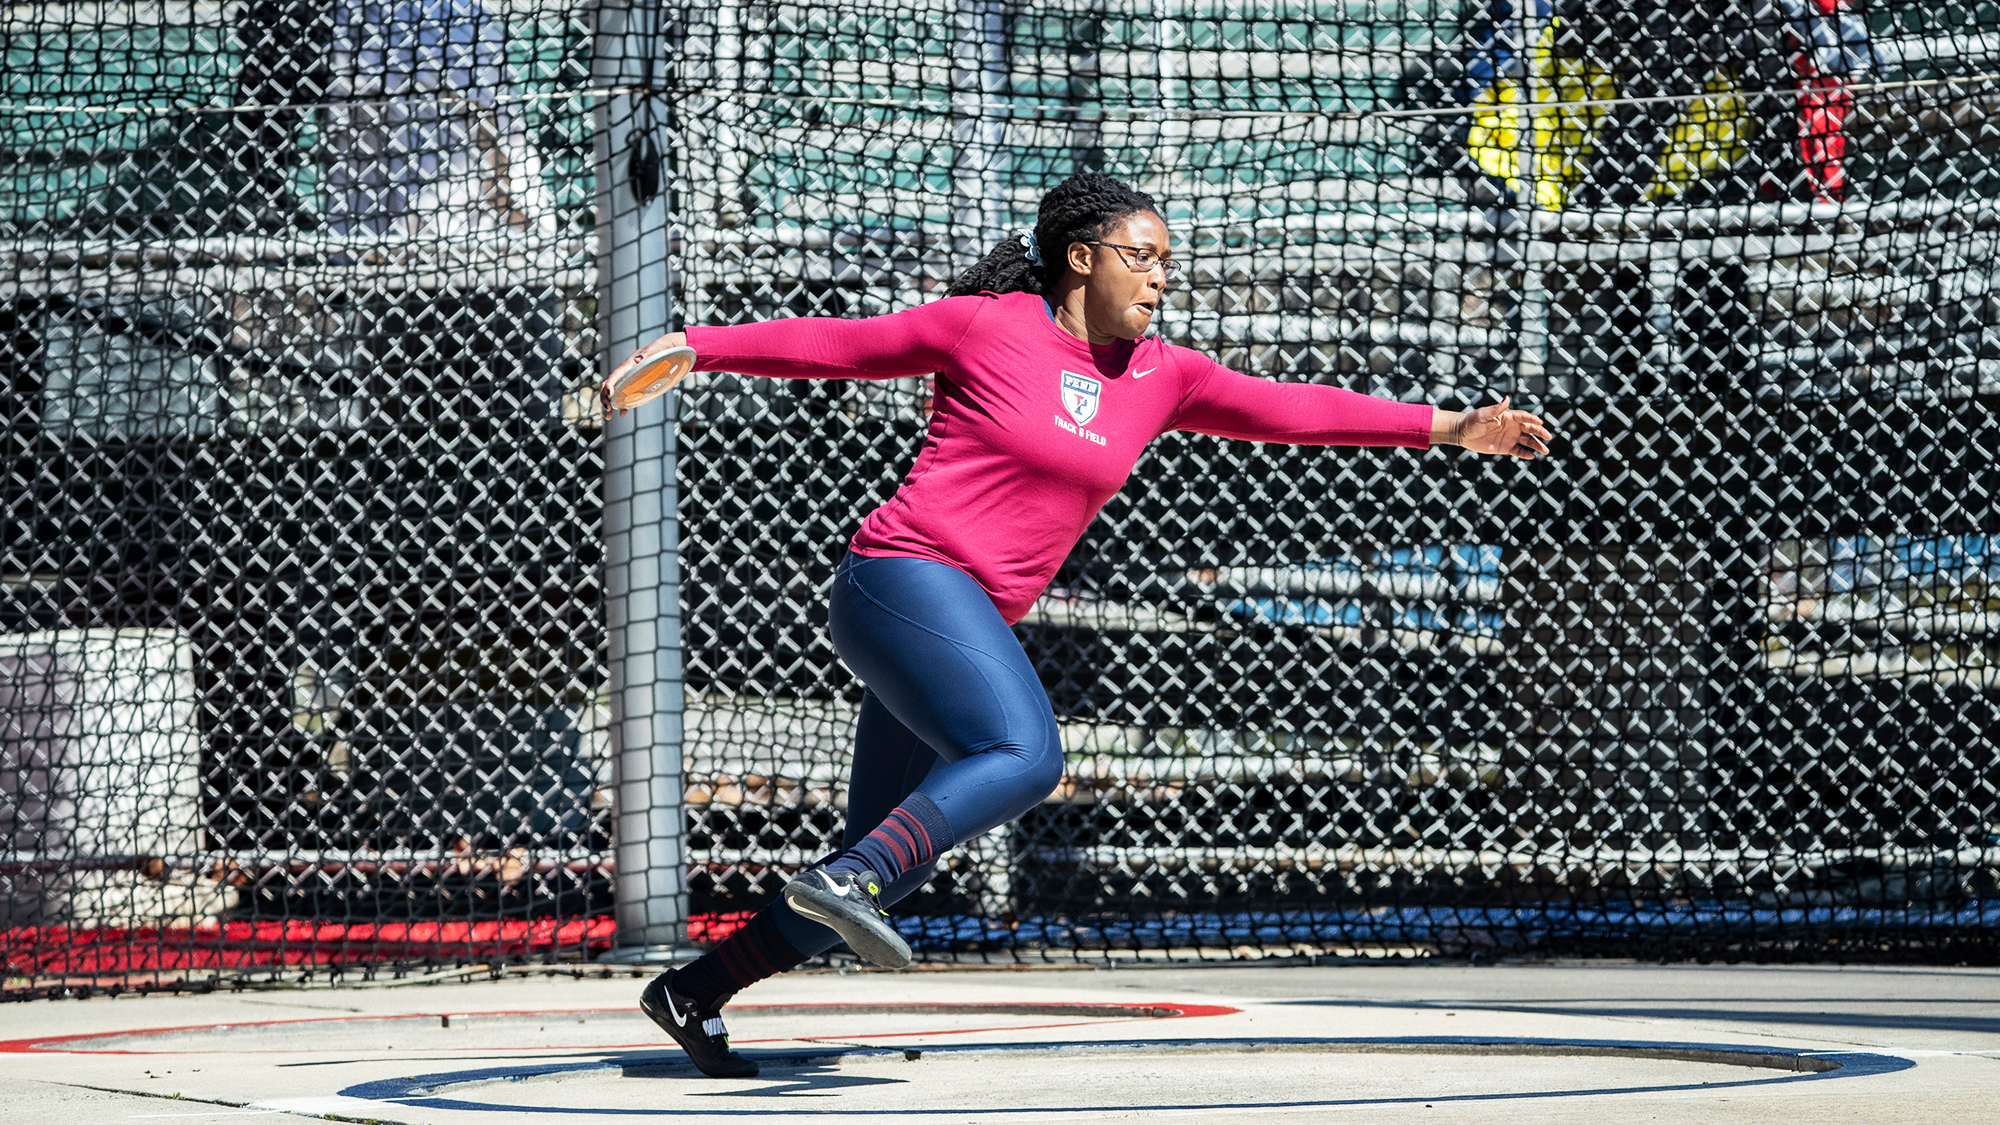 Sophomore thrower Mayyi Mahama prepares to throw the discus from the throwing circle during an event.